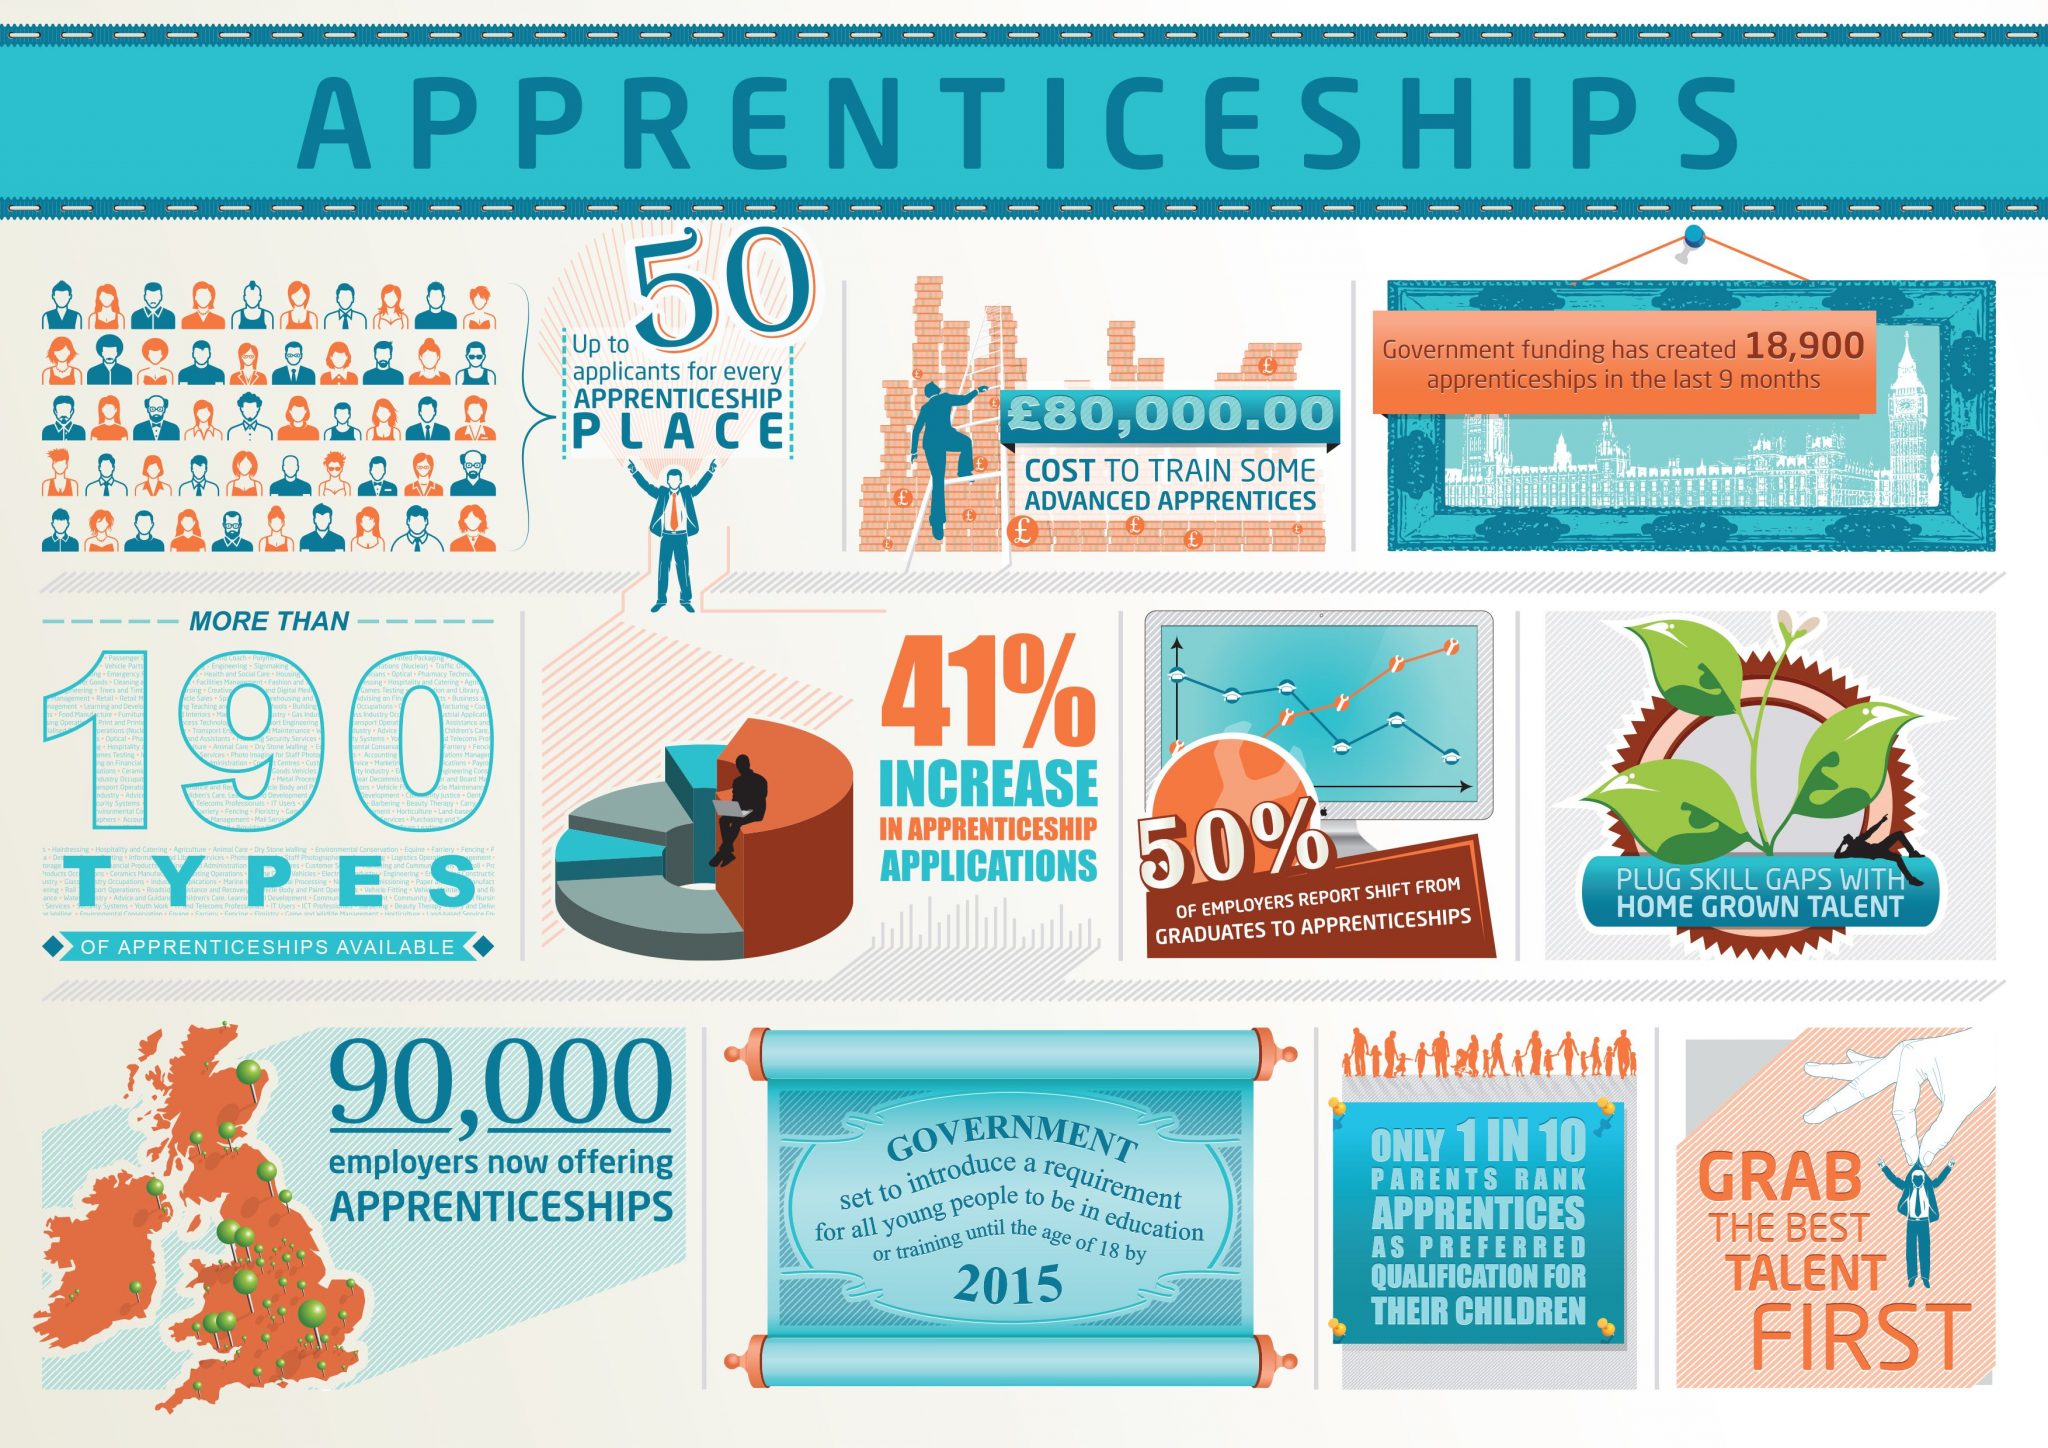 Reasons to Become an Apprentice